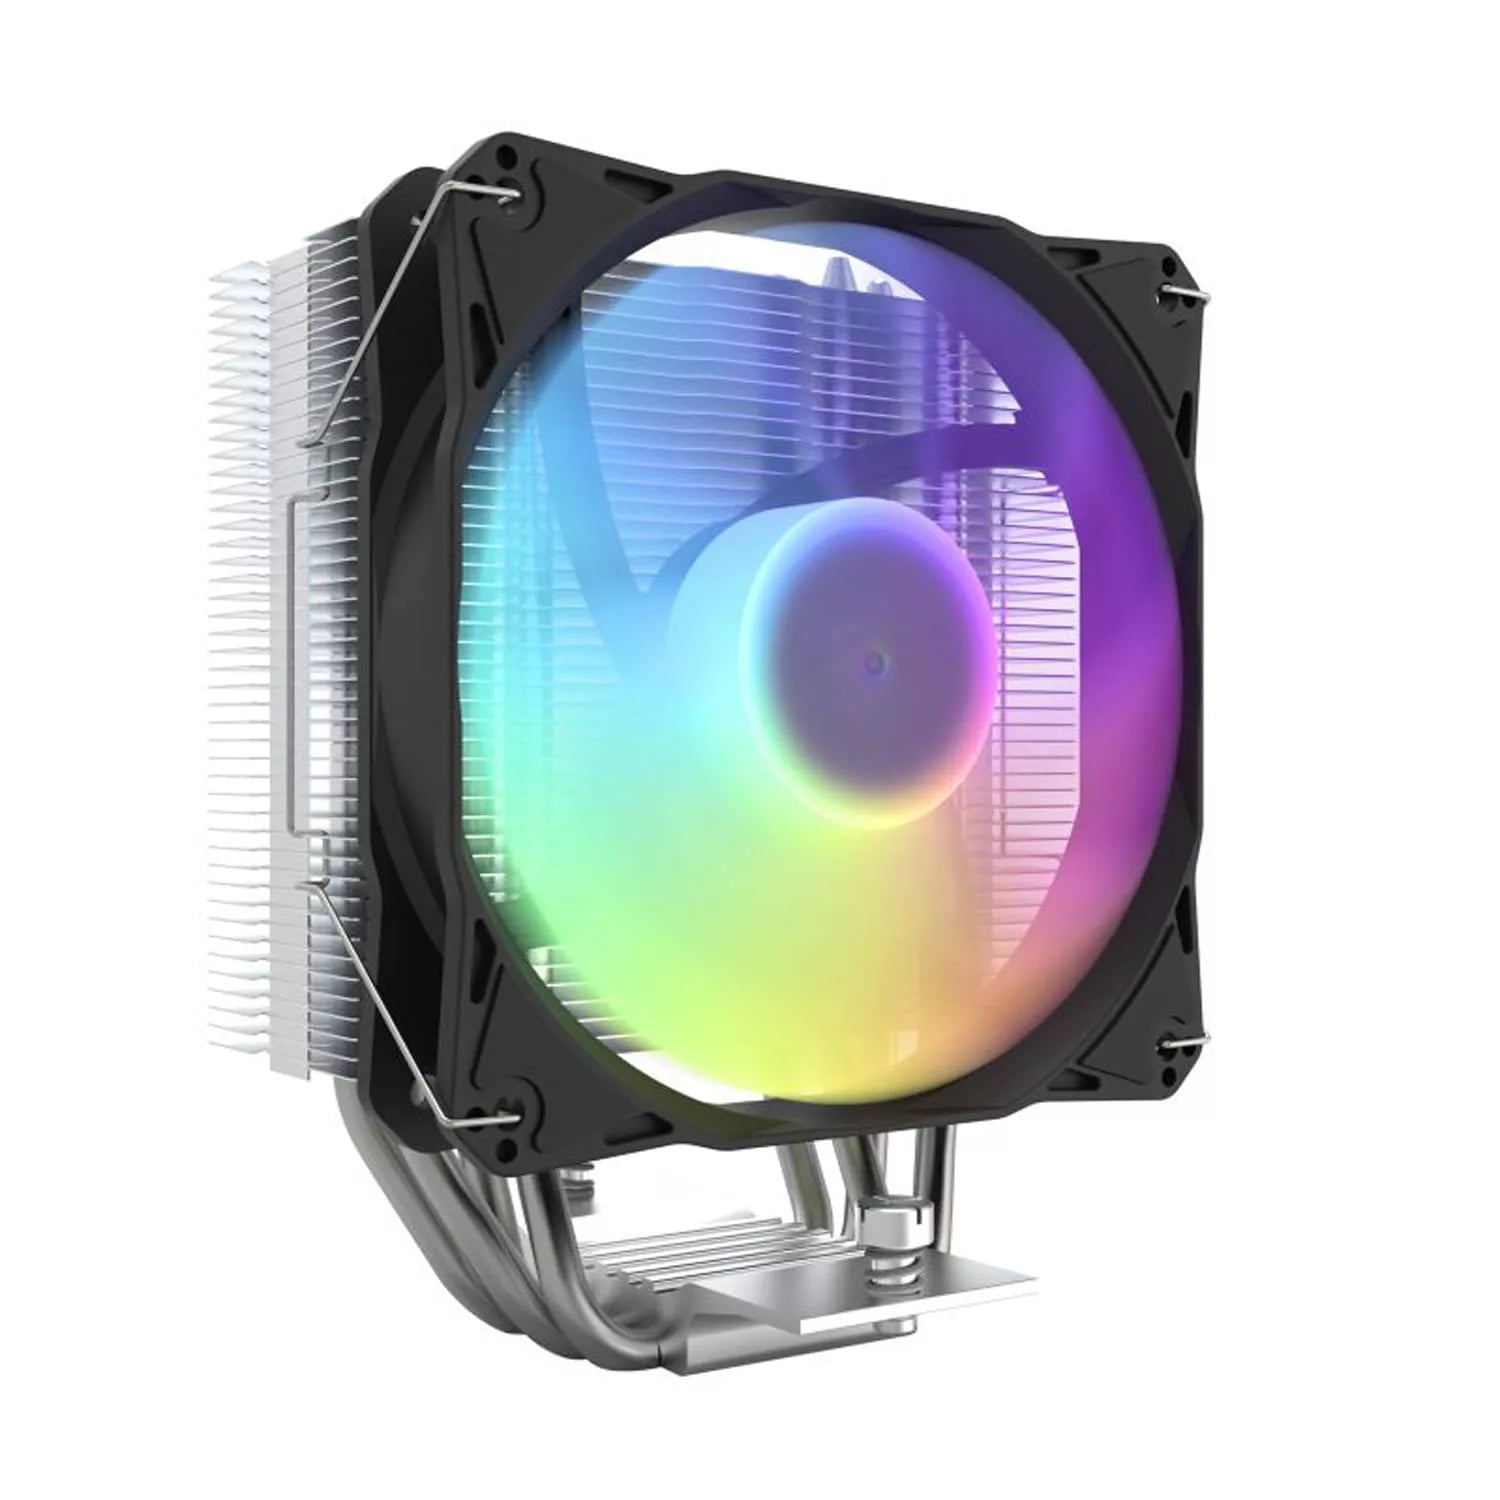 DarkFlash Z4 ARGB CPU Air Cooler: 4 Heat Pipes, 120mm ARGB Fan, Affordable Performance and Style